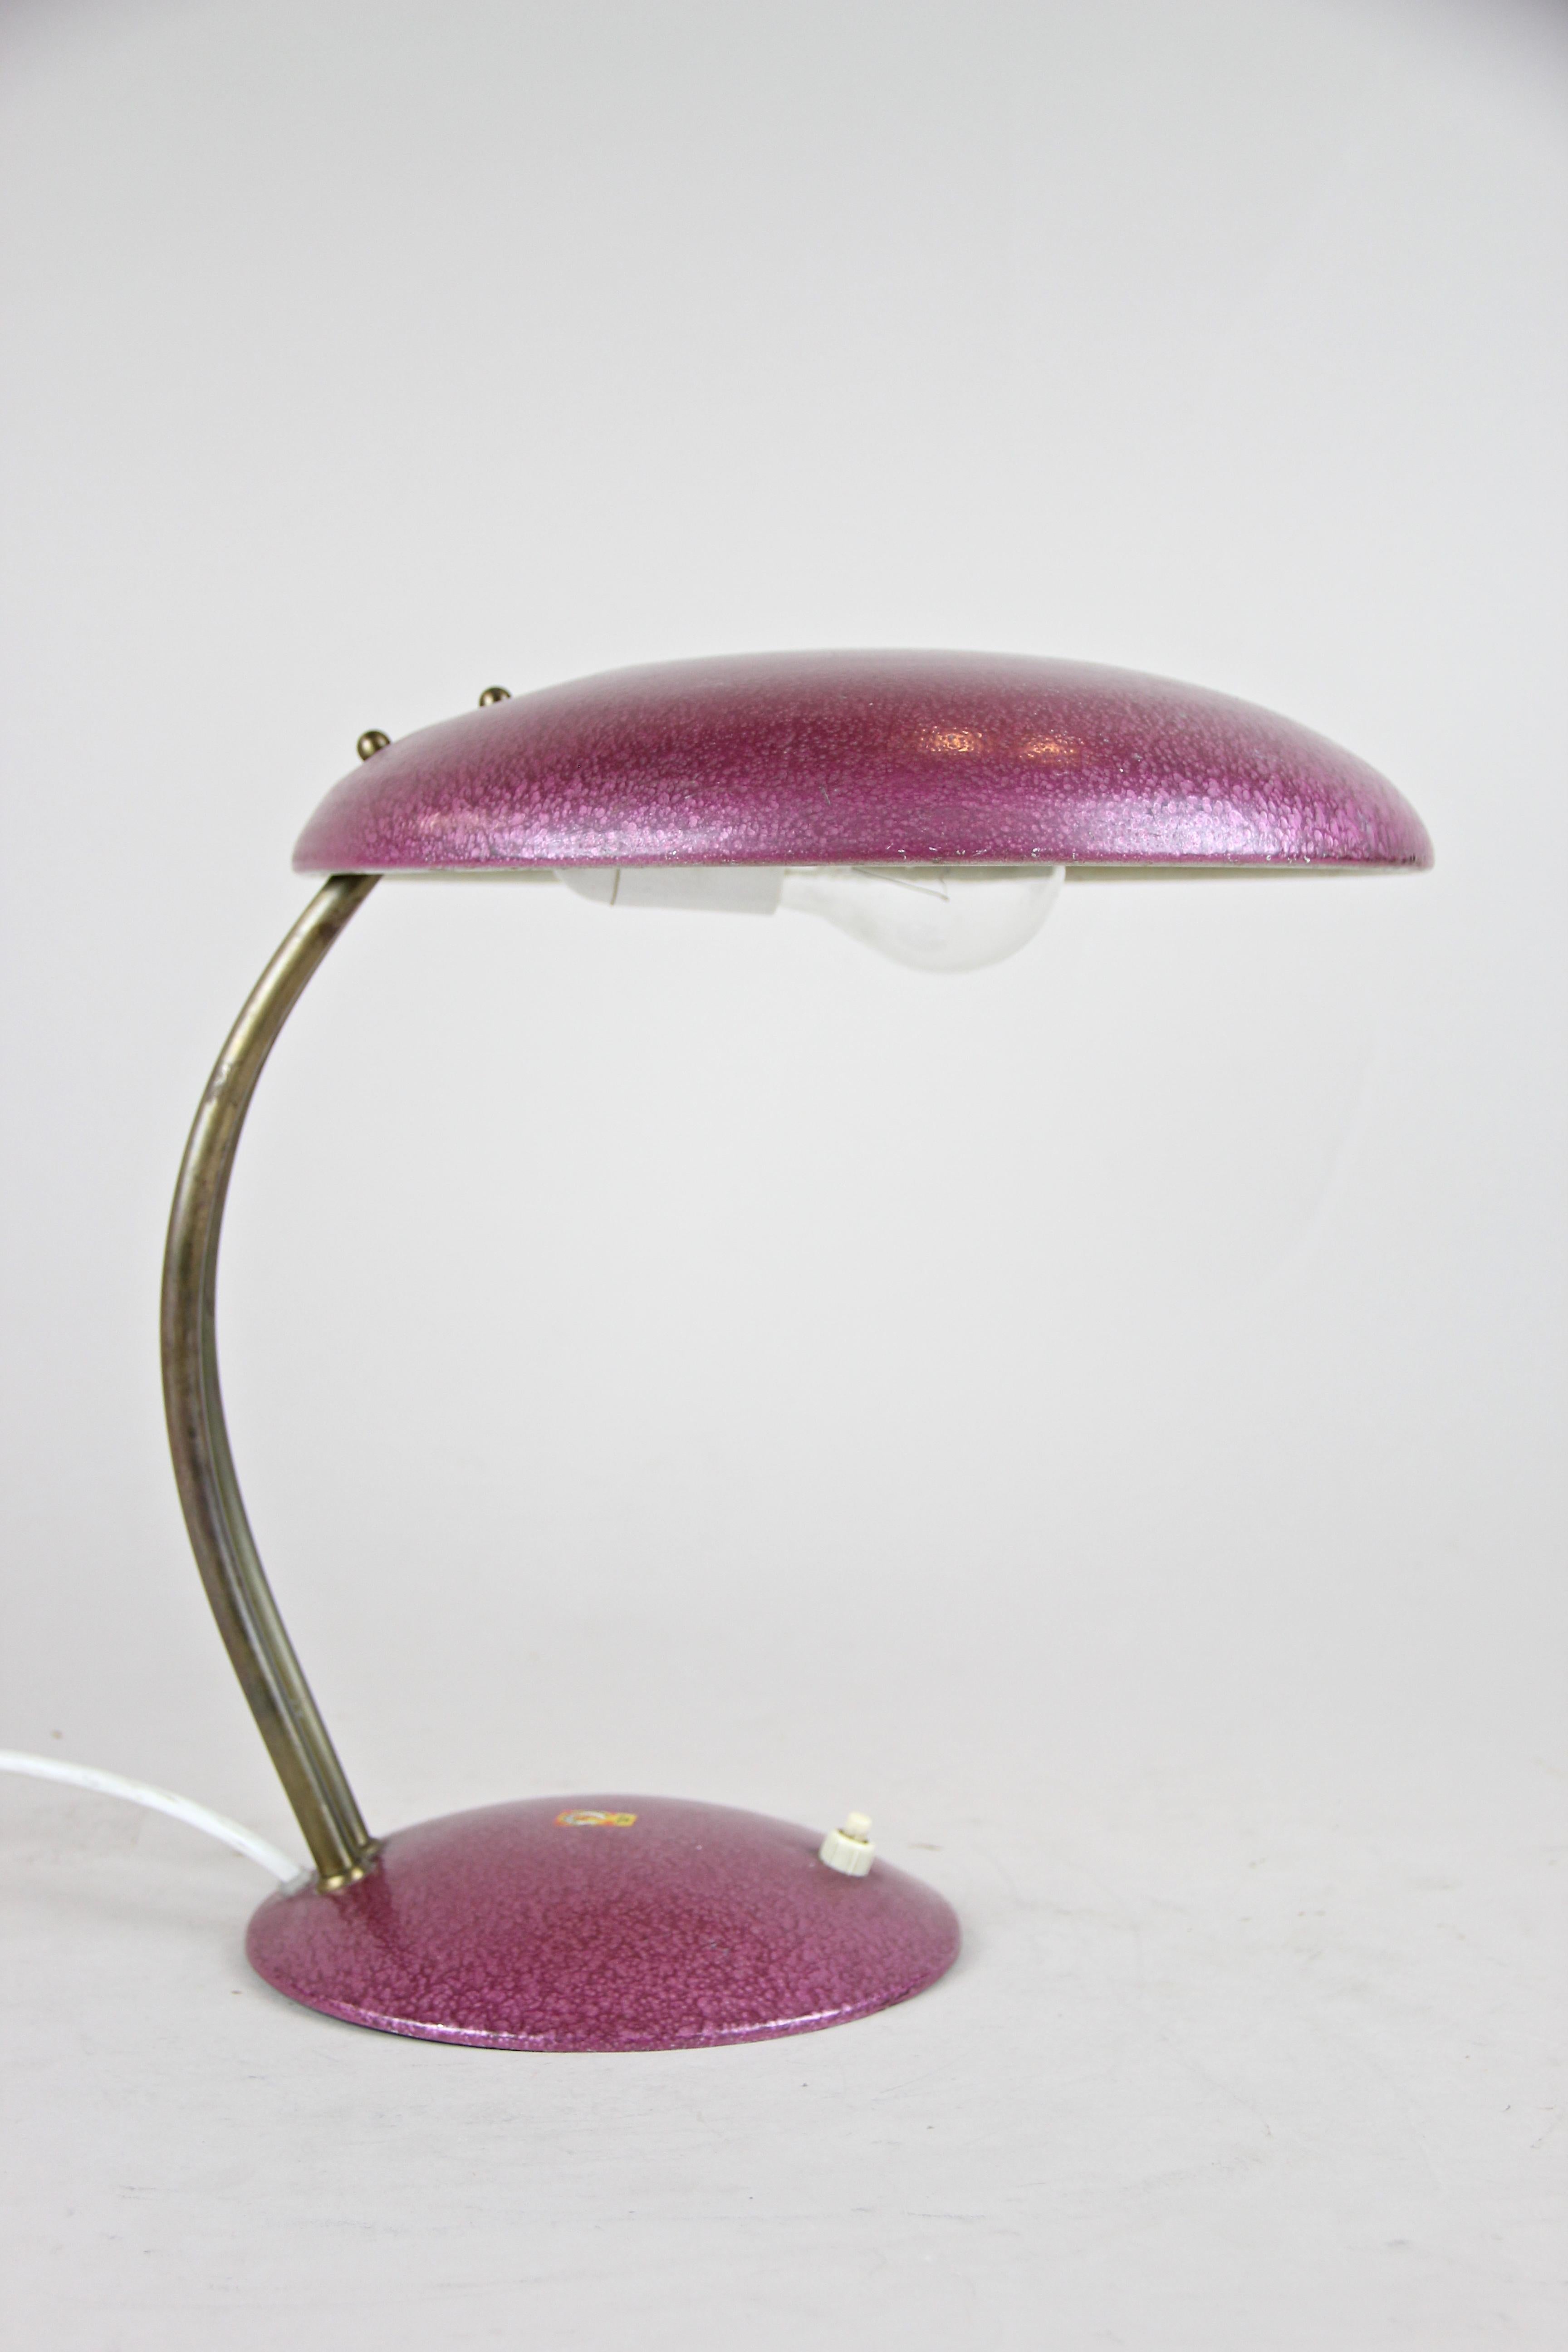 Hammered Mid Century Table Lamp Hammertone Finished, Austria, circa 1960/70